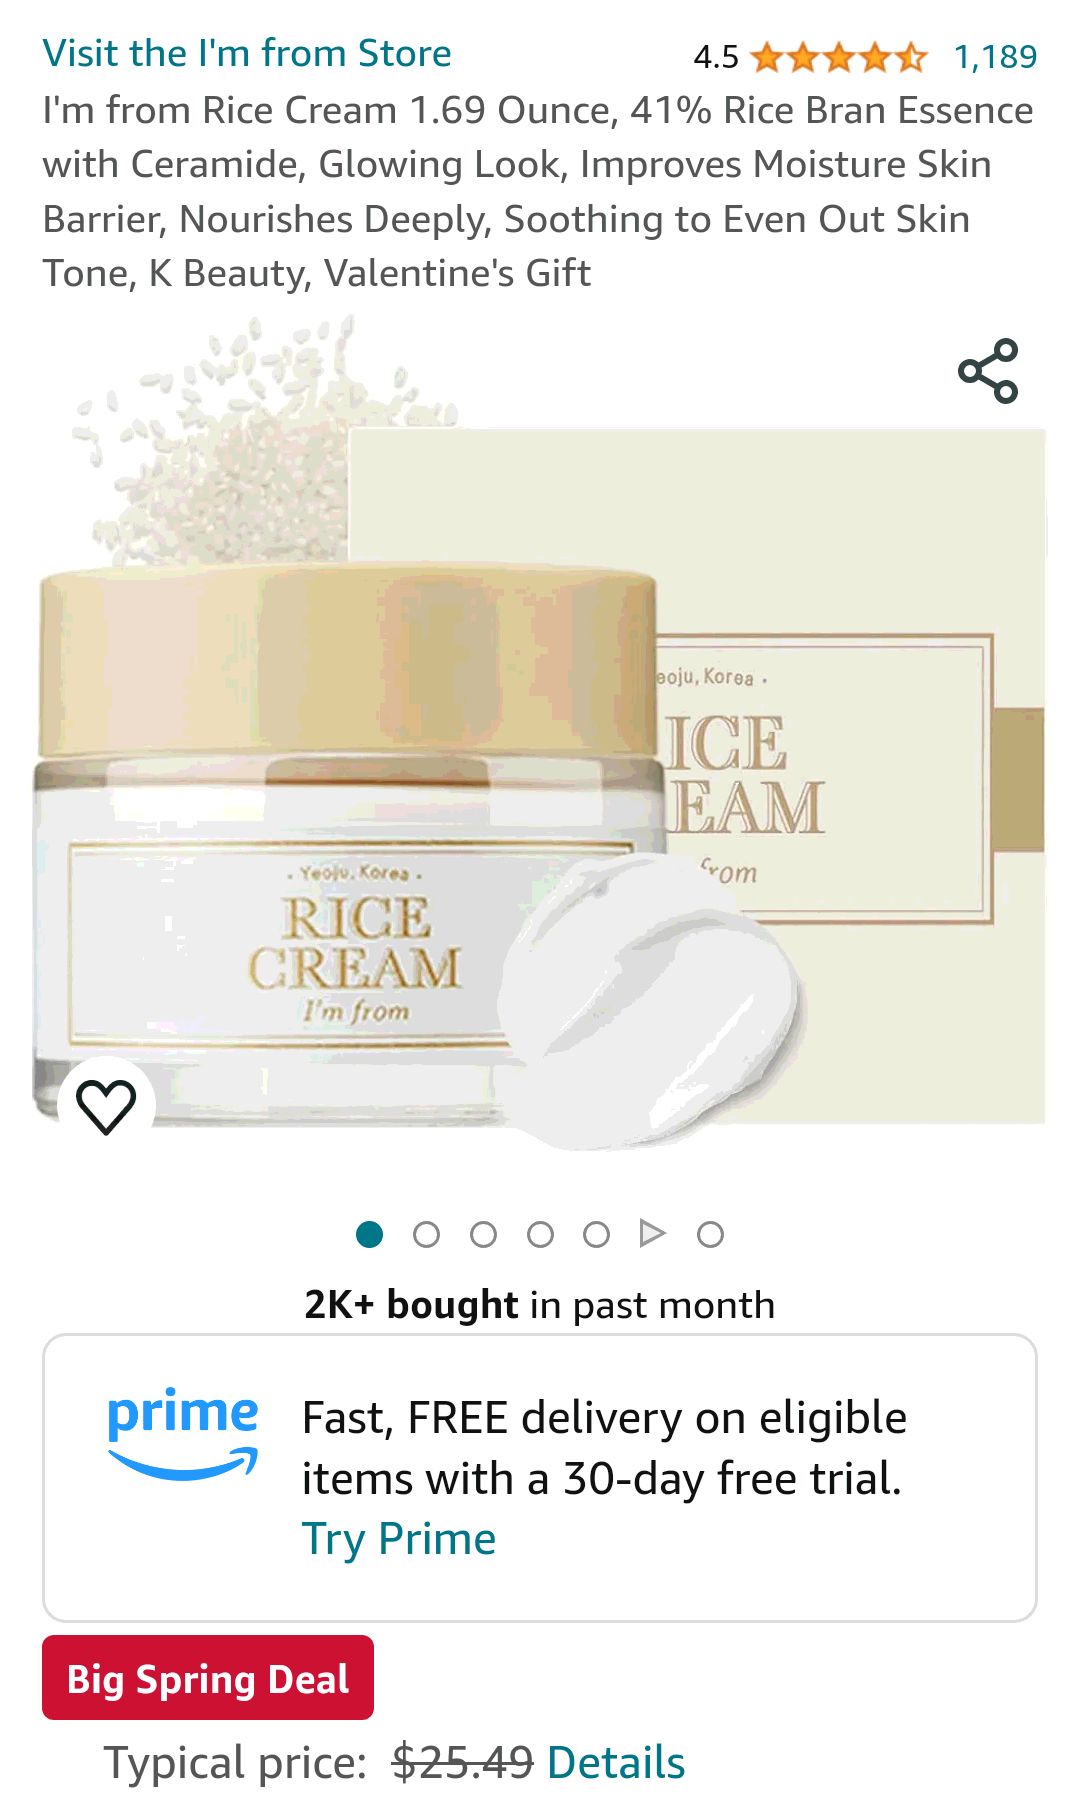 I'm from Rice Cream 1.69 Ounce, 41% Rice Bran Essence with Ceramide, Glowing Look, Improves Moisture Skin Barrier, Nourishes Deeply, Soothing to Even Out Skin Tone, K Beauty, Valentine's Gift : Beauty